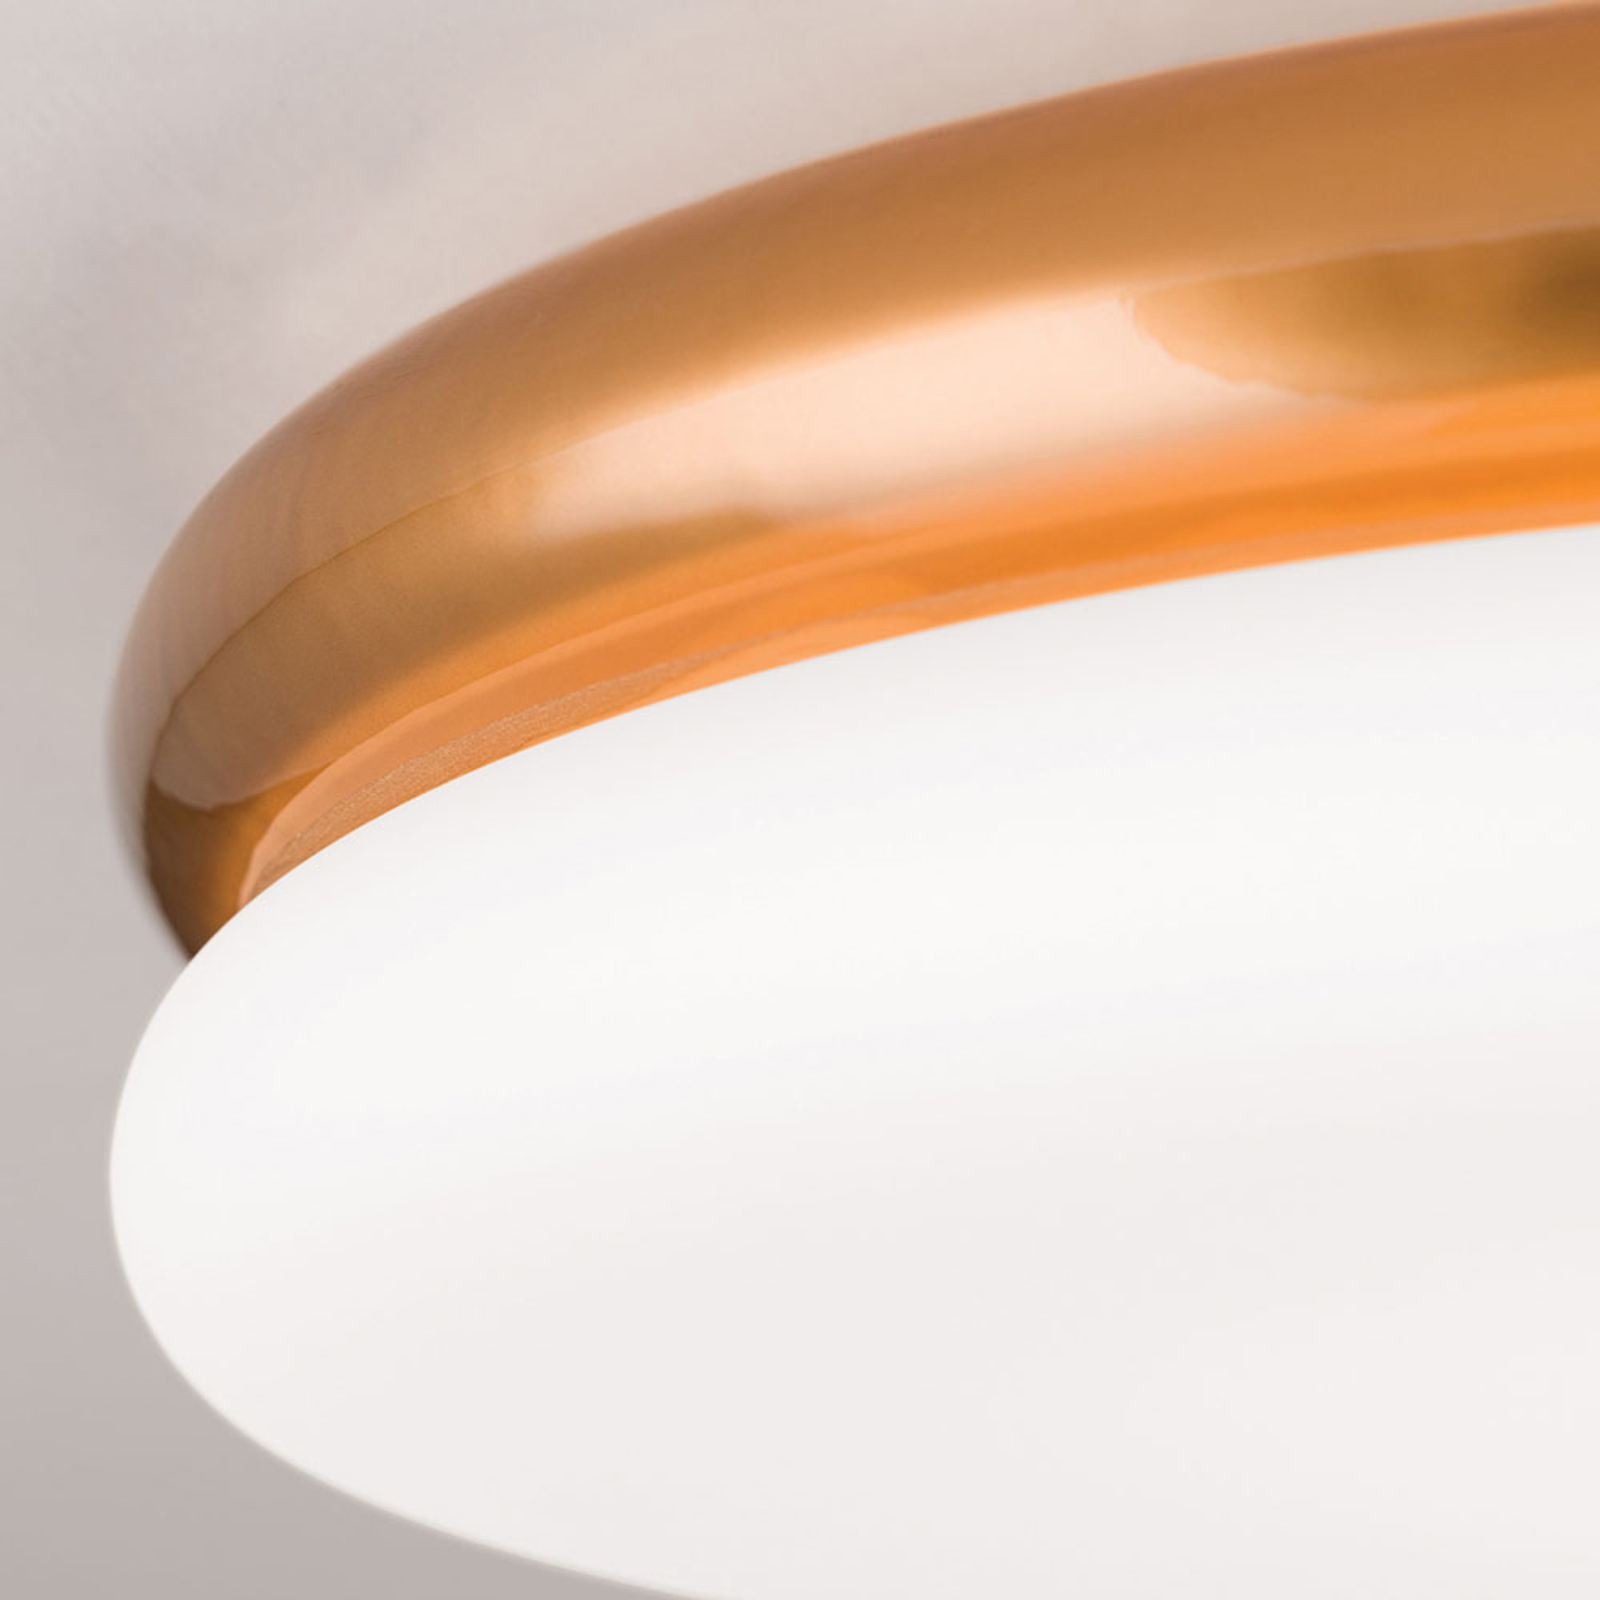 James LED ceiling light with metal housing, copper